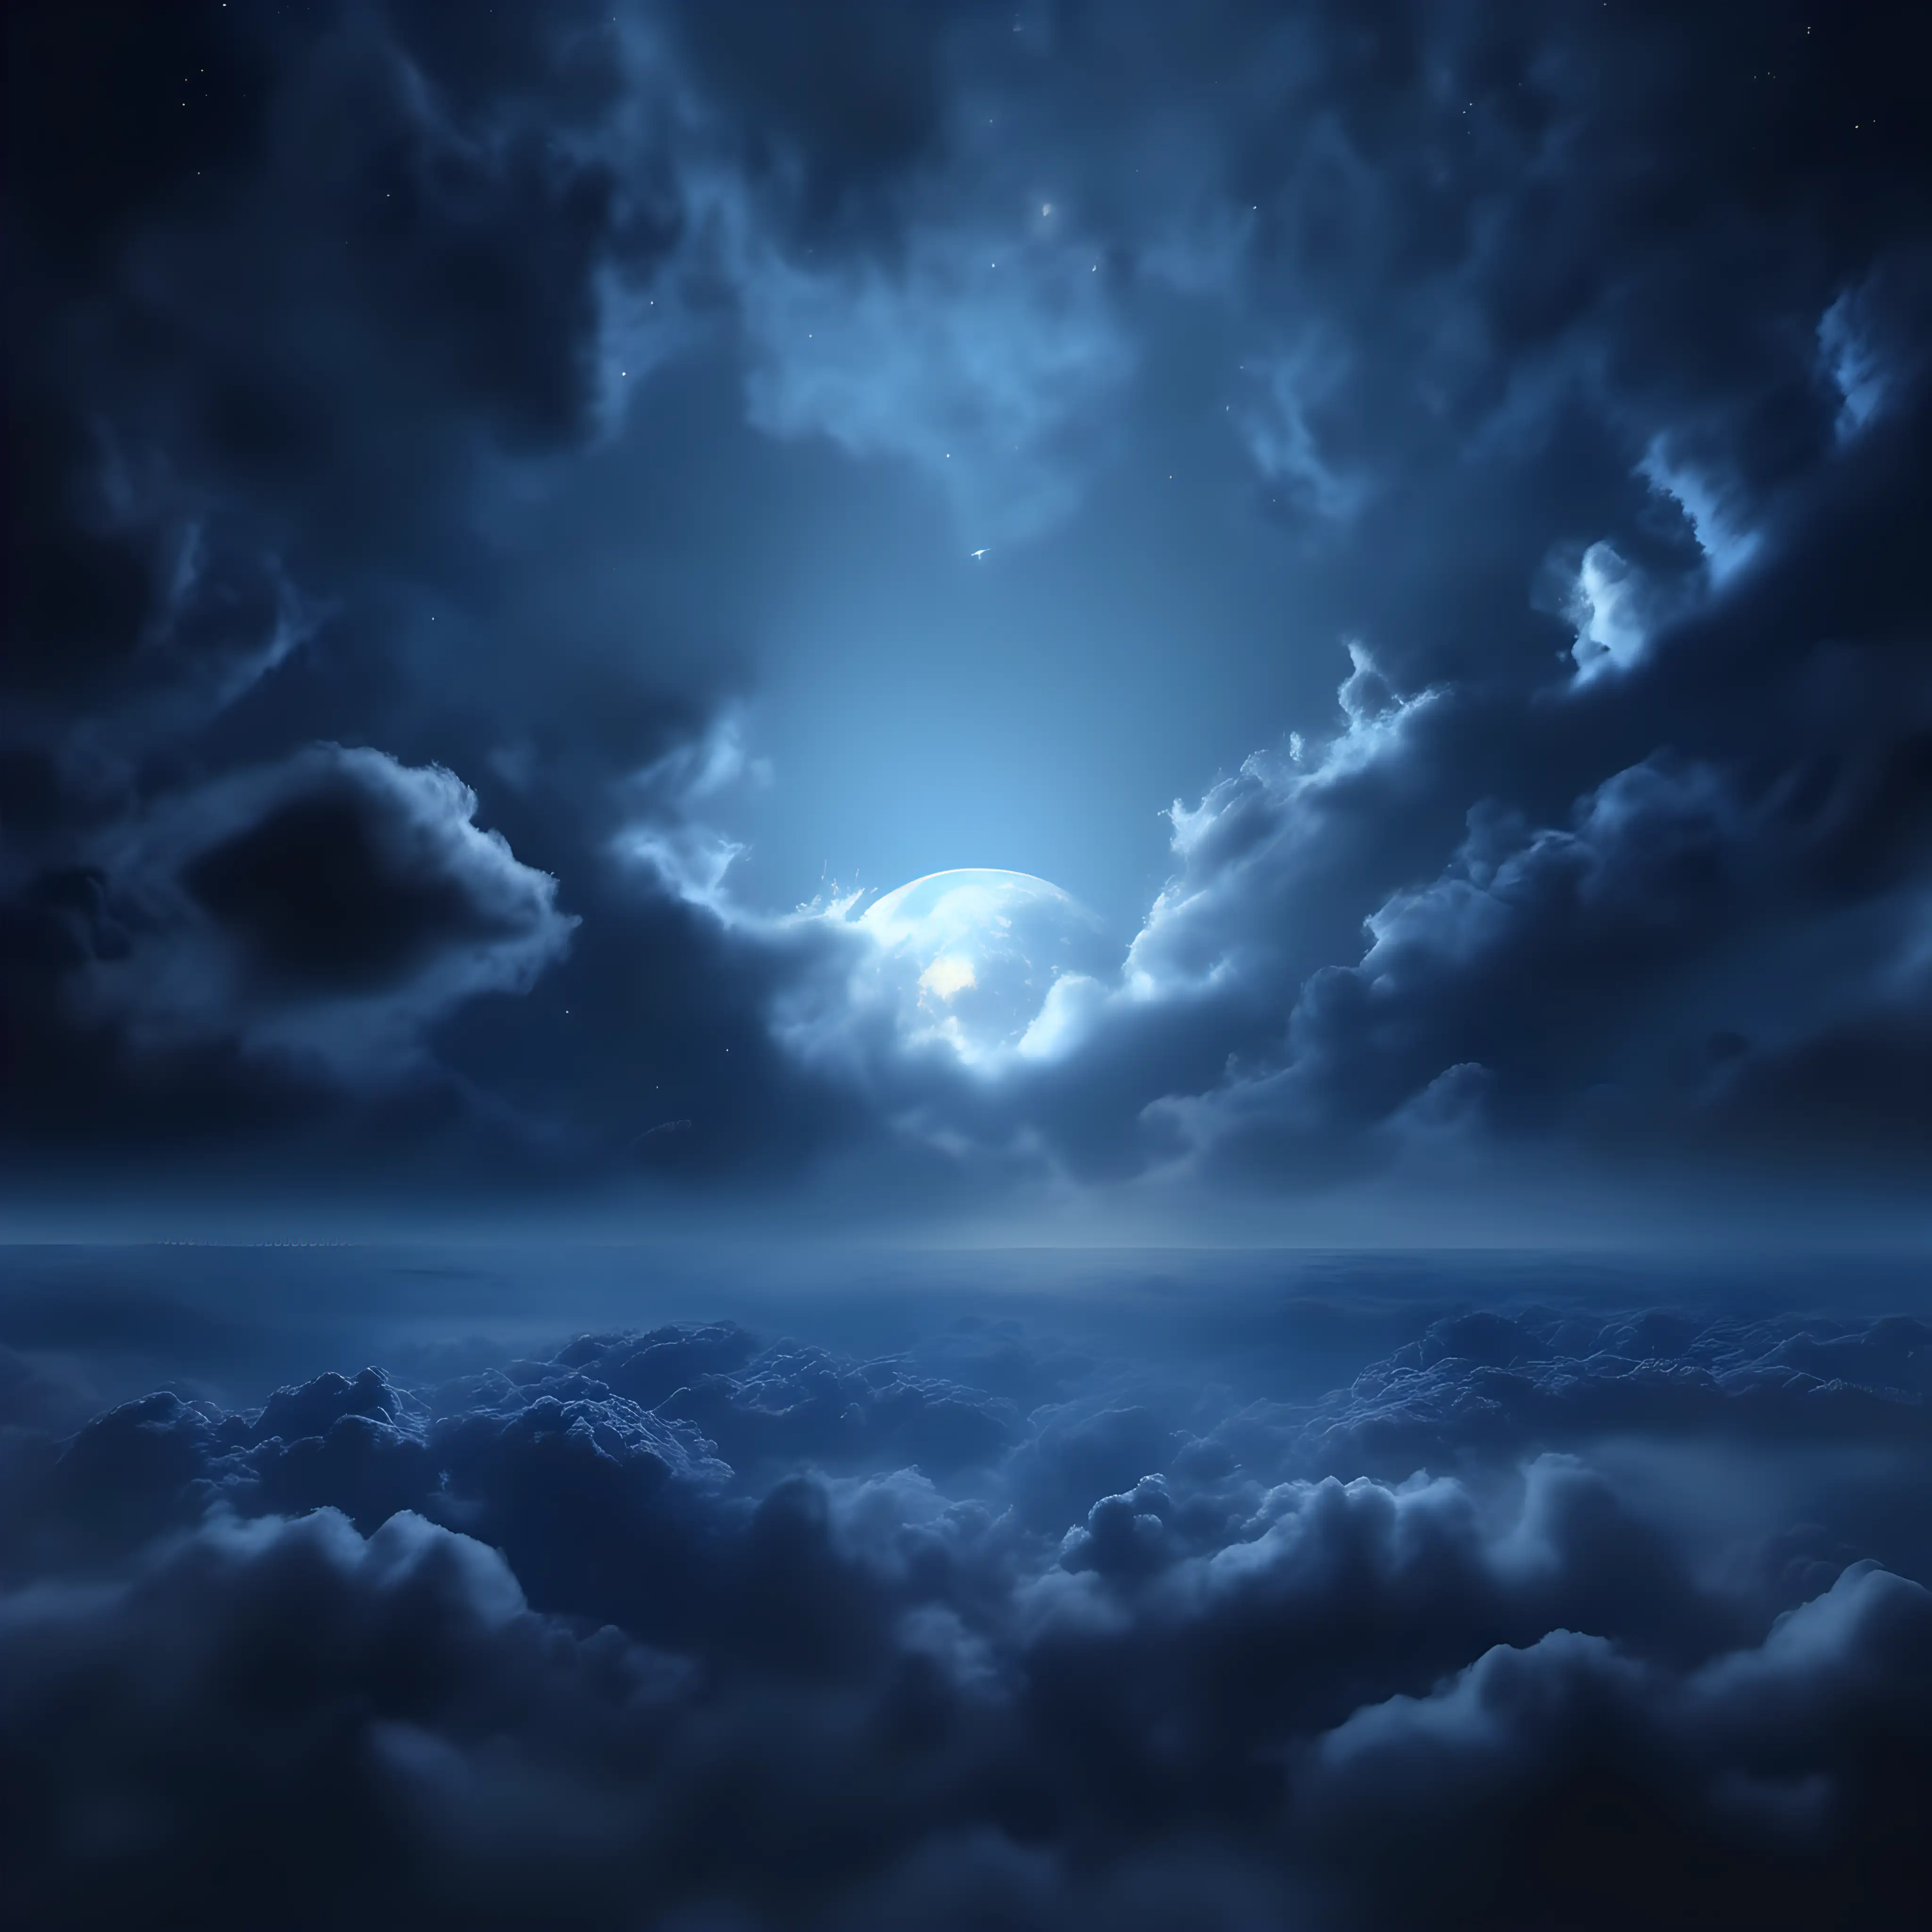 Realistic Dark Night Sky with Clouds